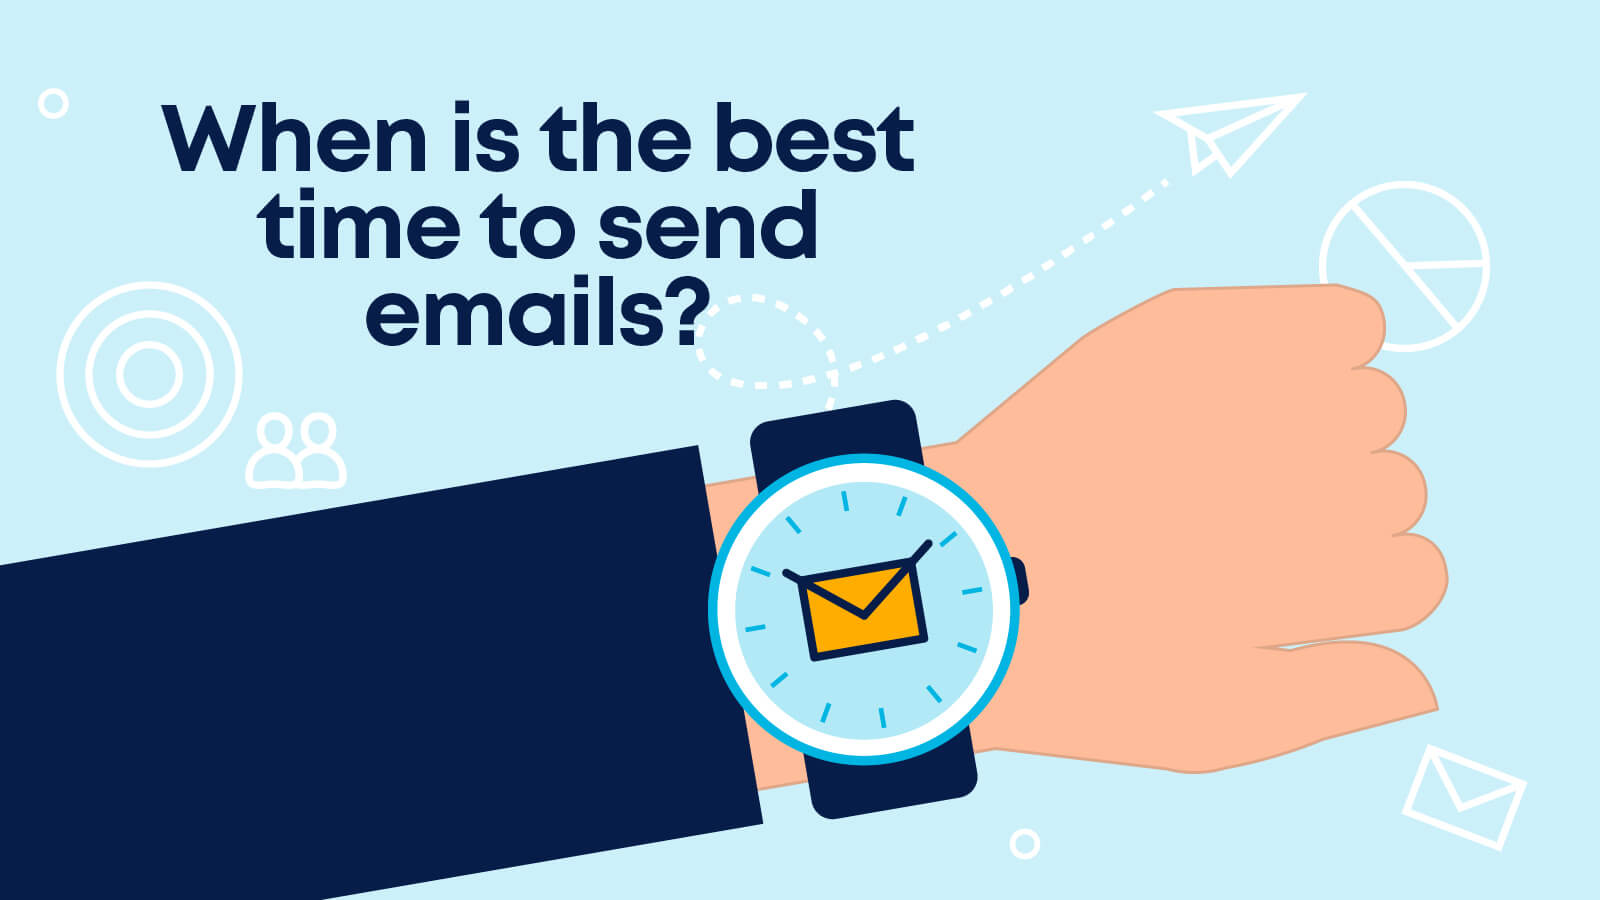 What's the best time to send emails